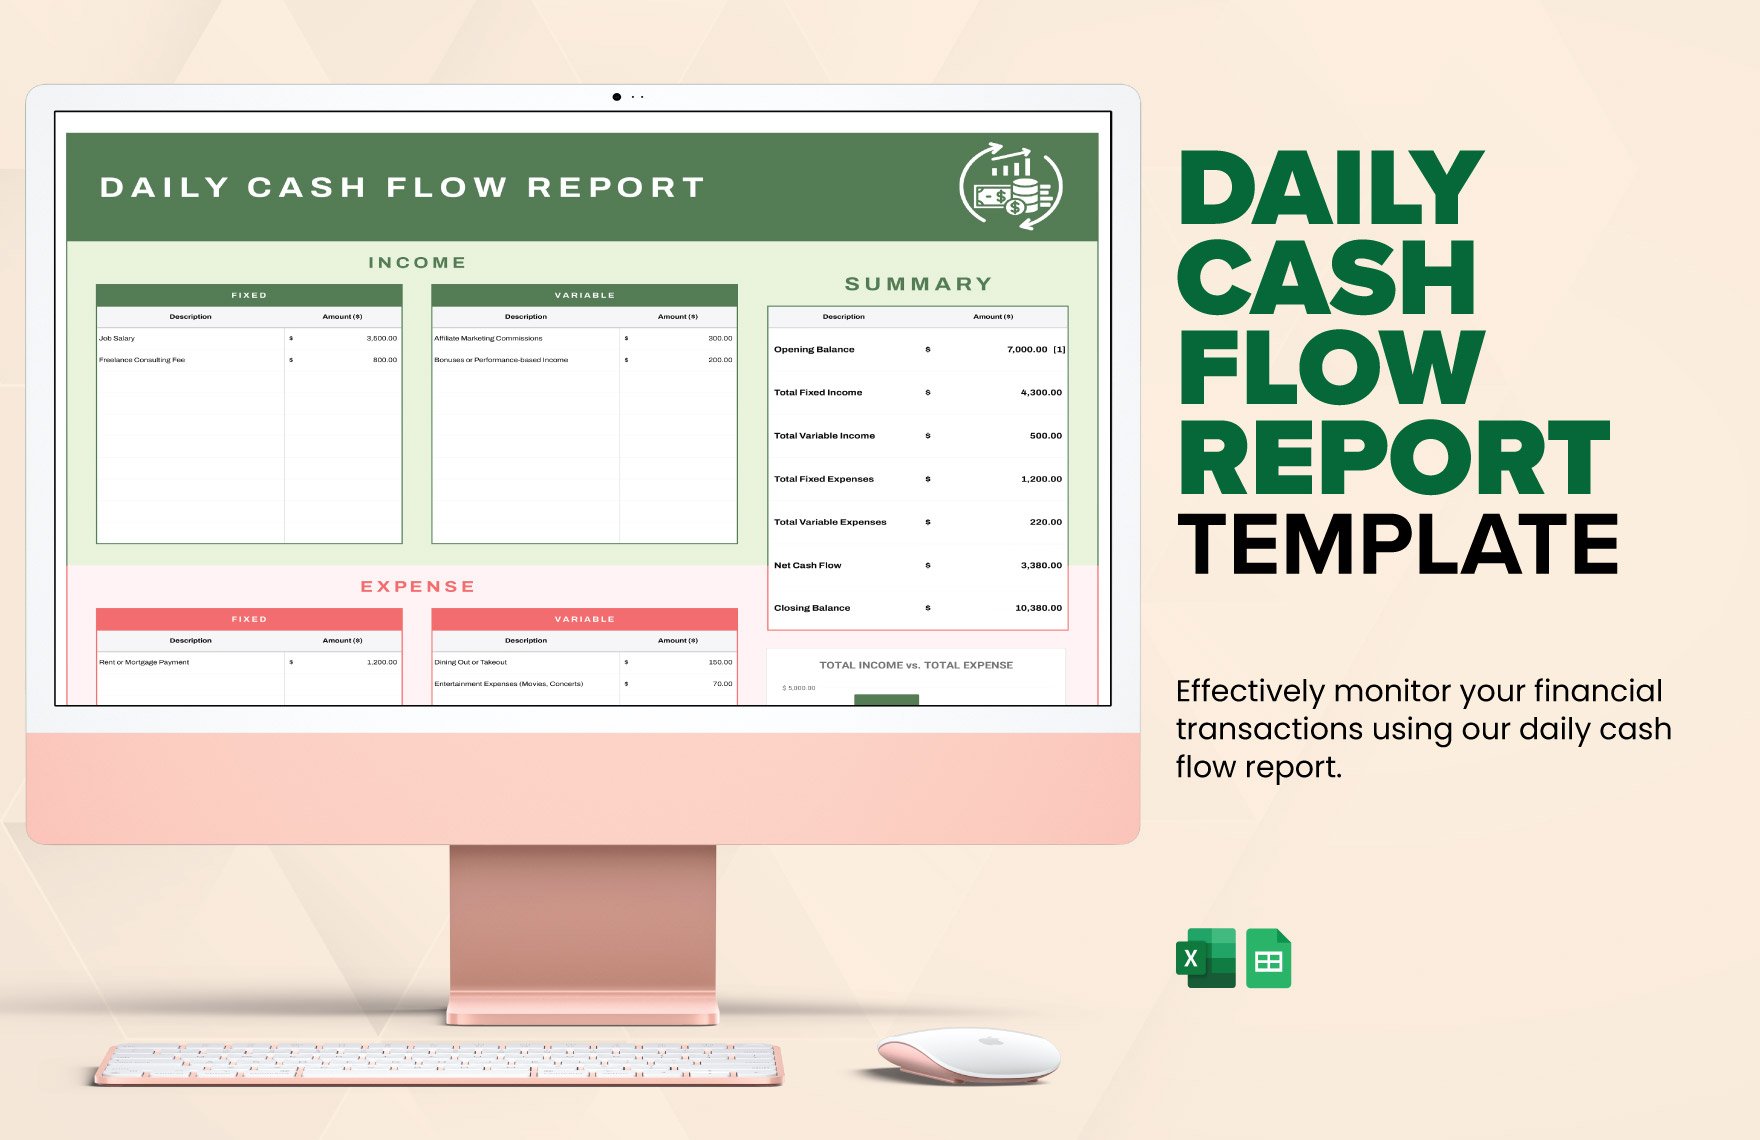 Daily Cash Flow Report Template